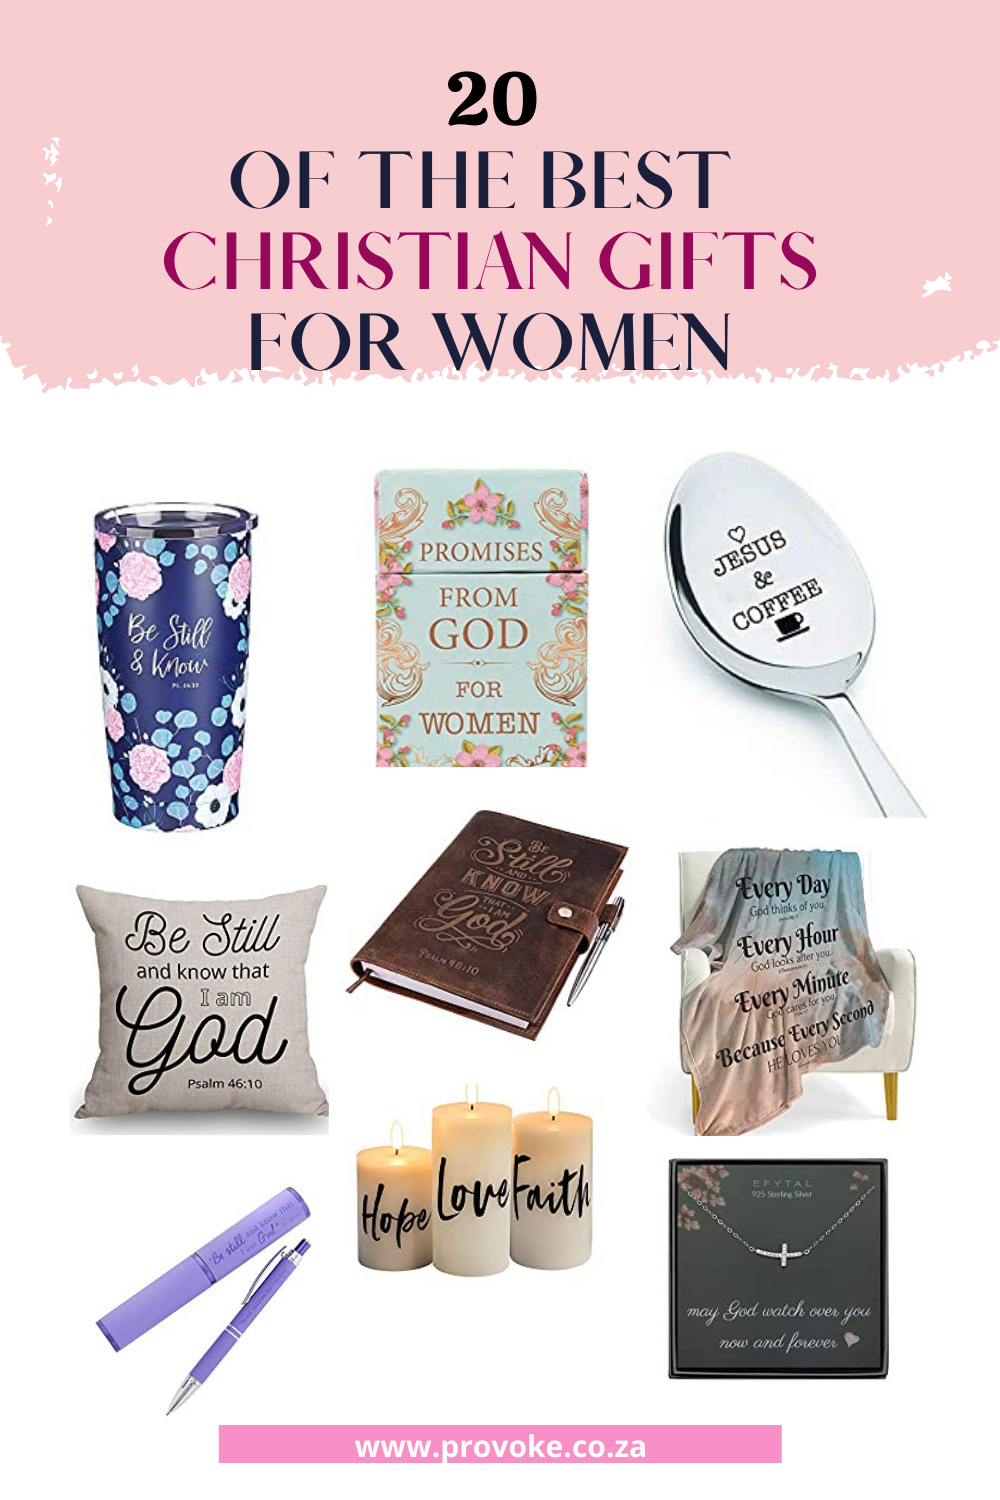 20 Of The Best Christian Gifts For Women - PROVOKE